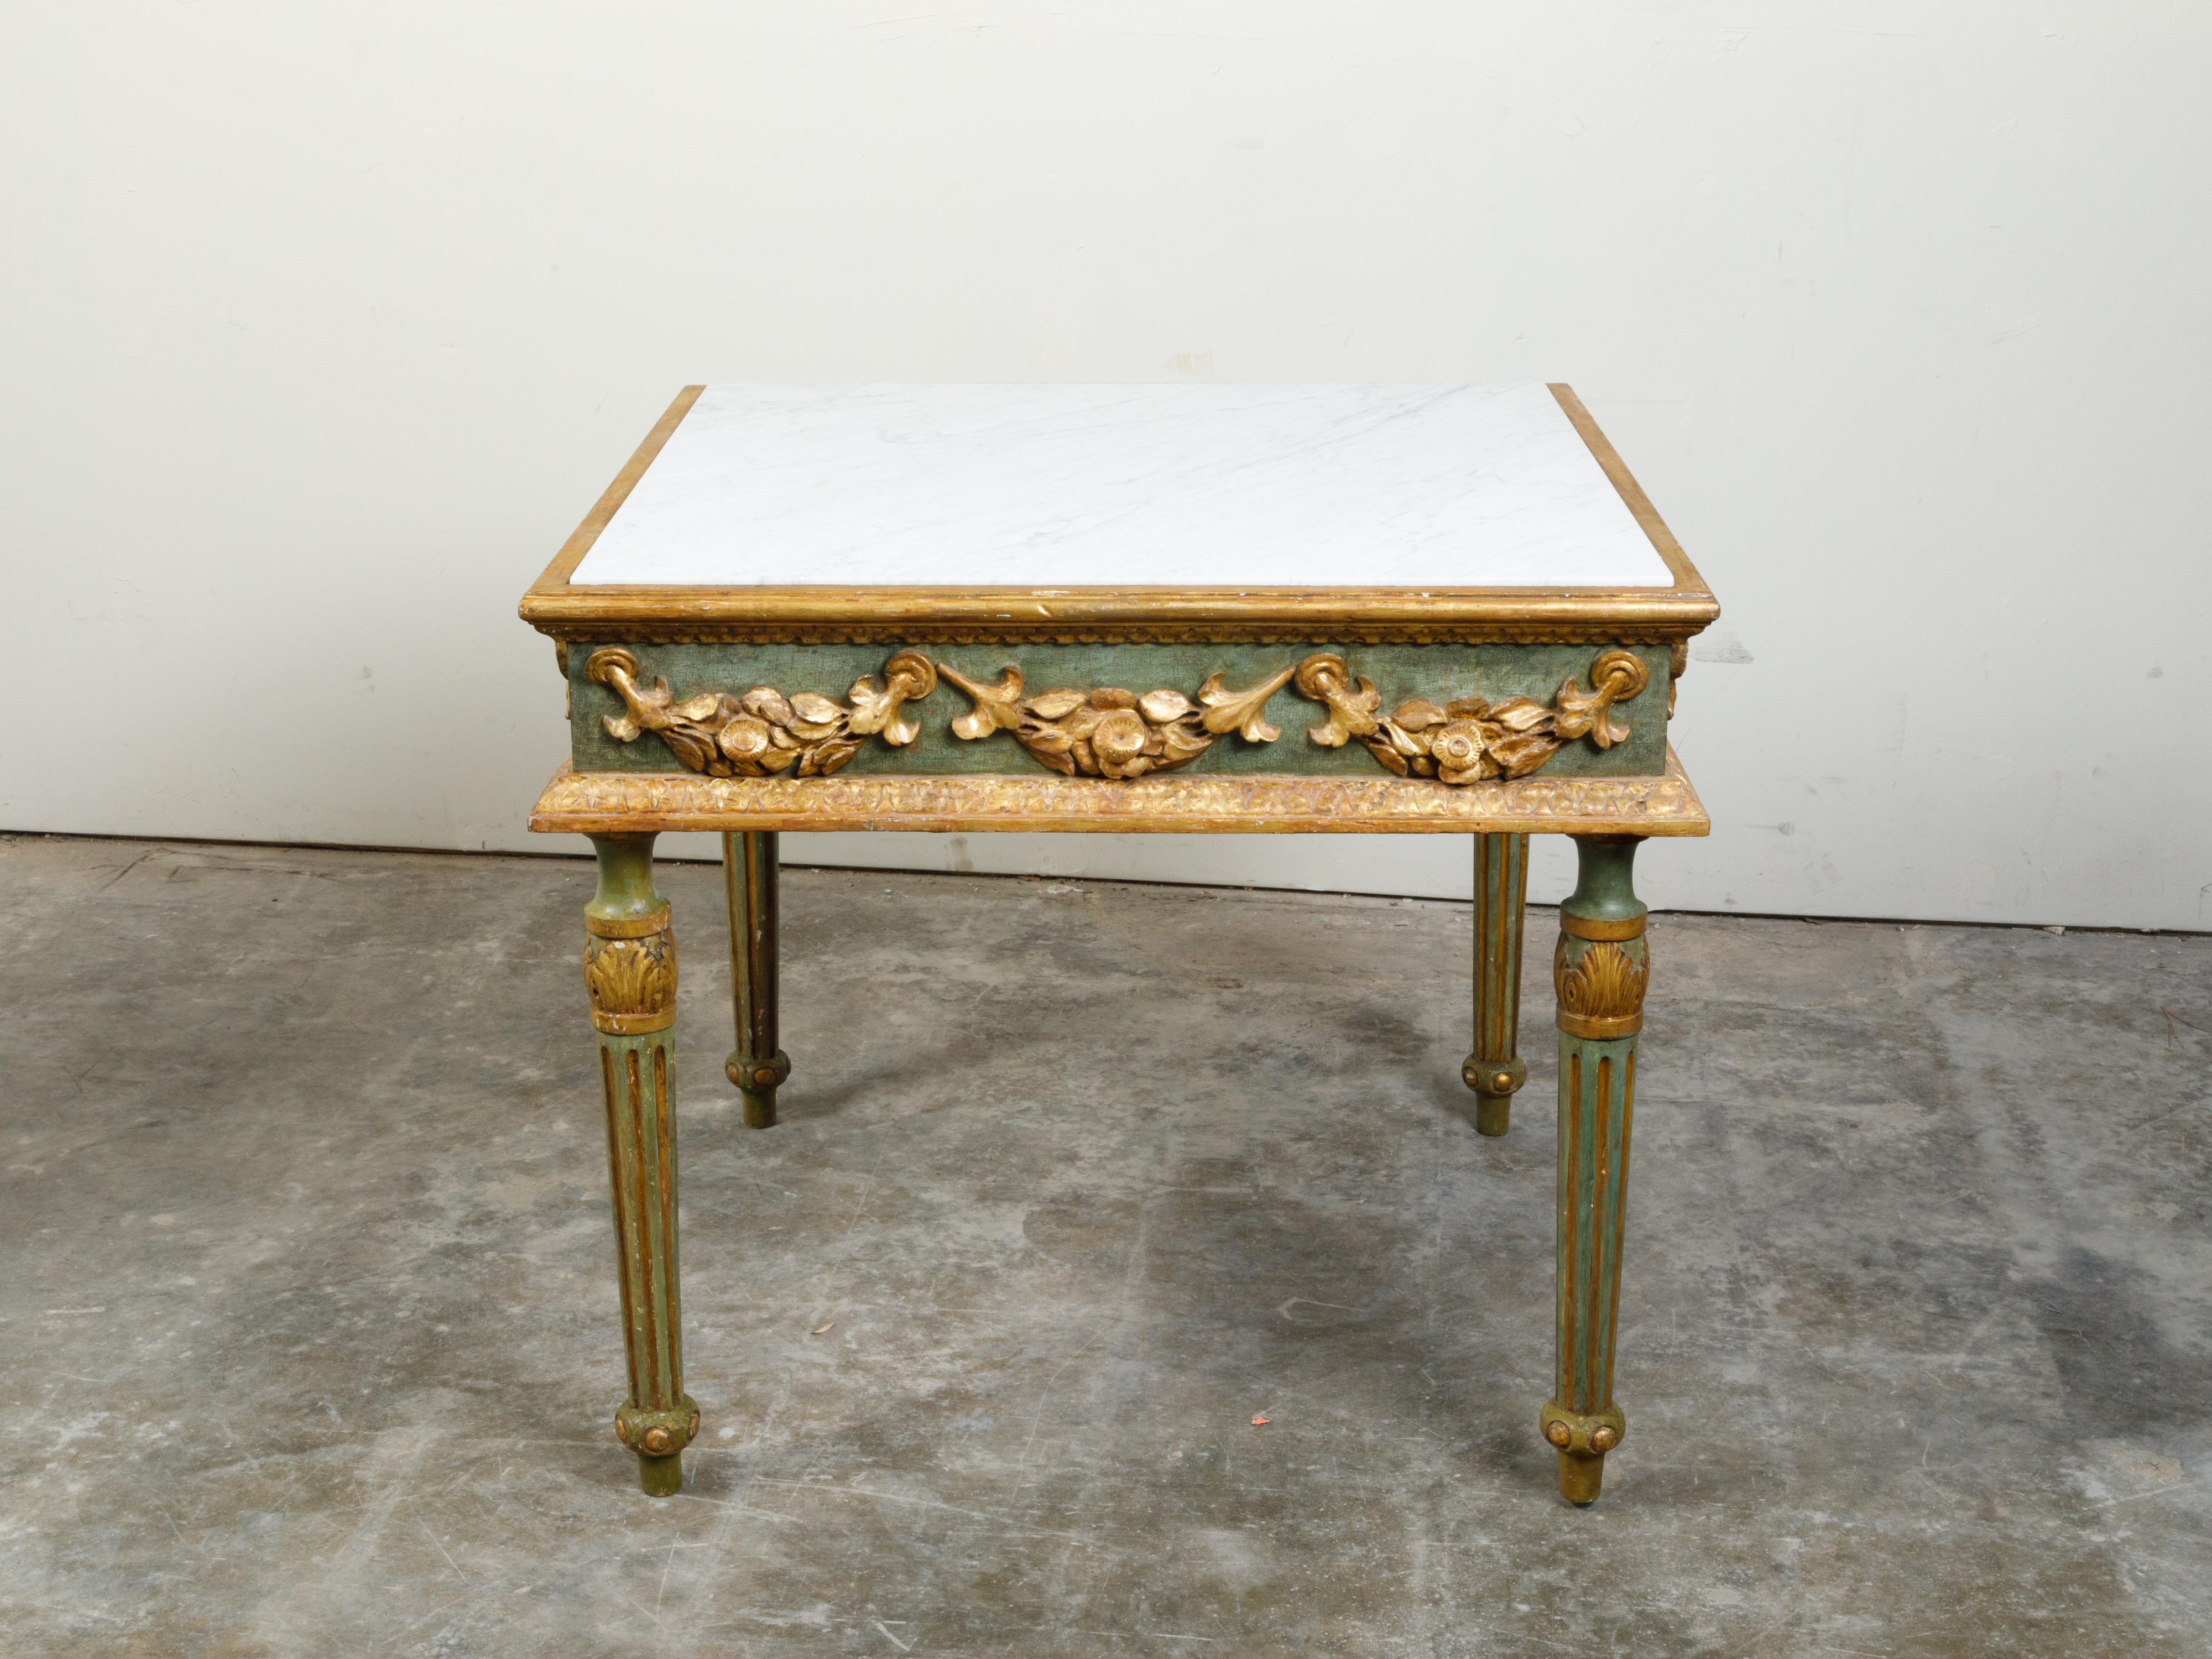 Italian Neoclassical Period 18th Century Center Table with Carved Gilt Garlands For Sale 2